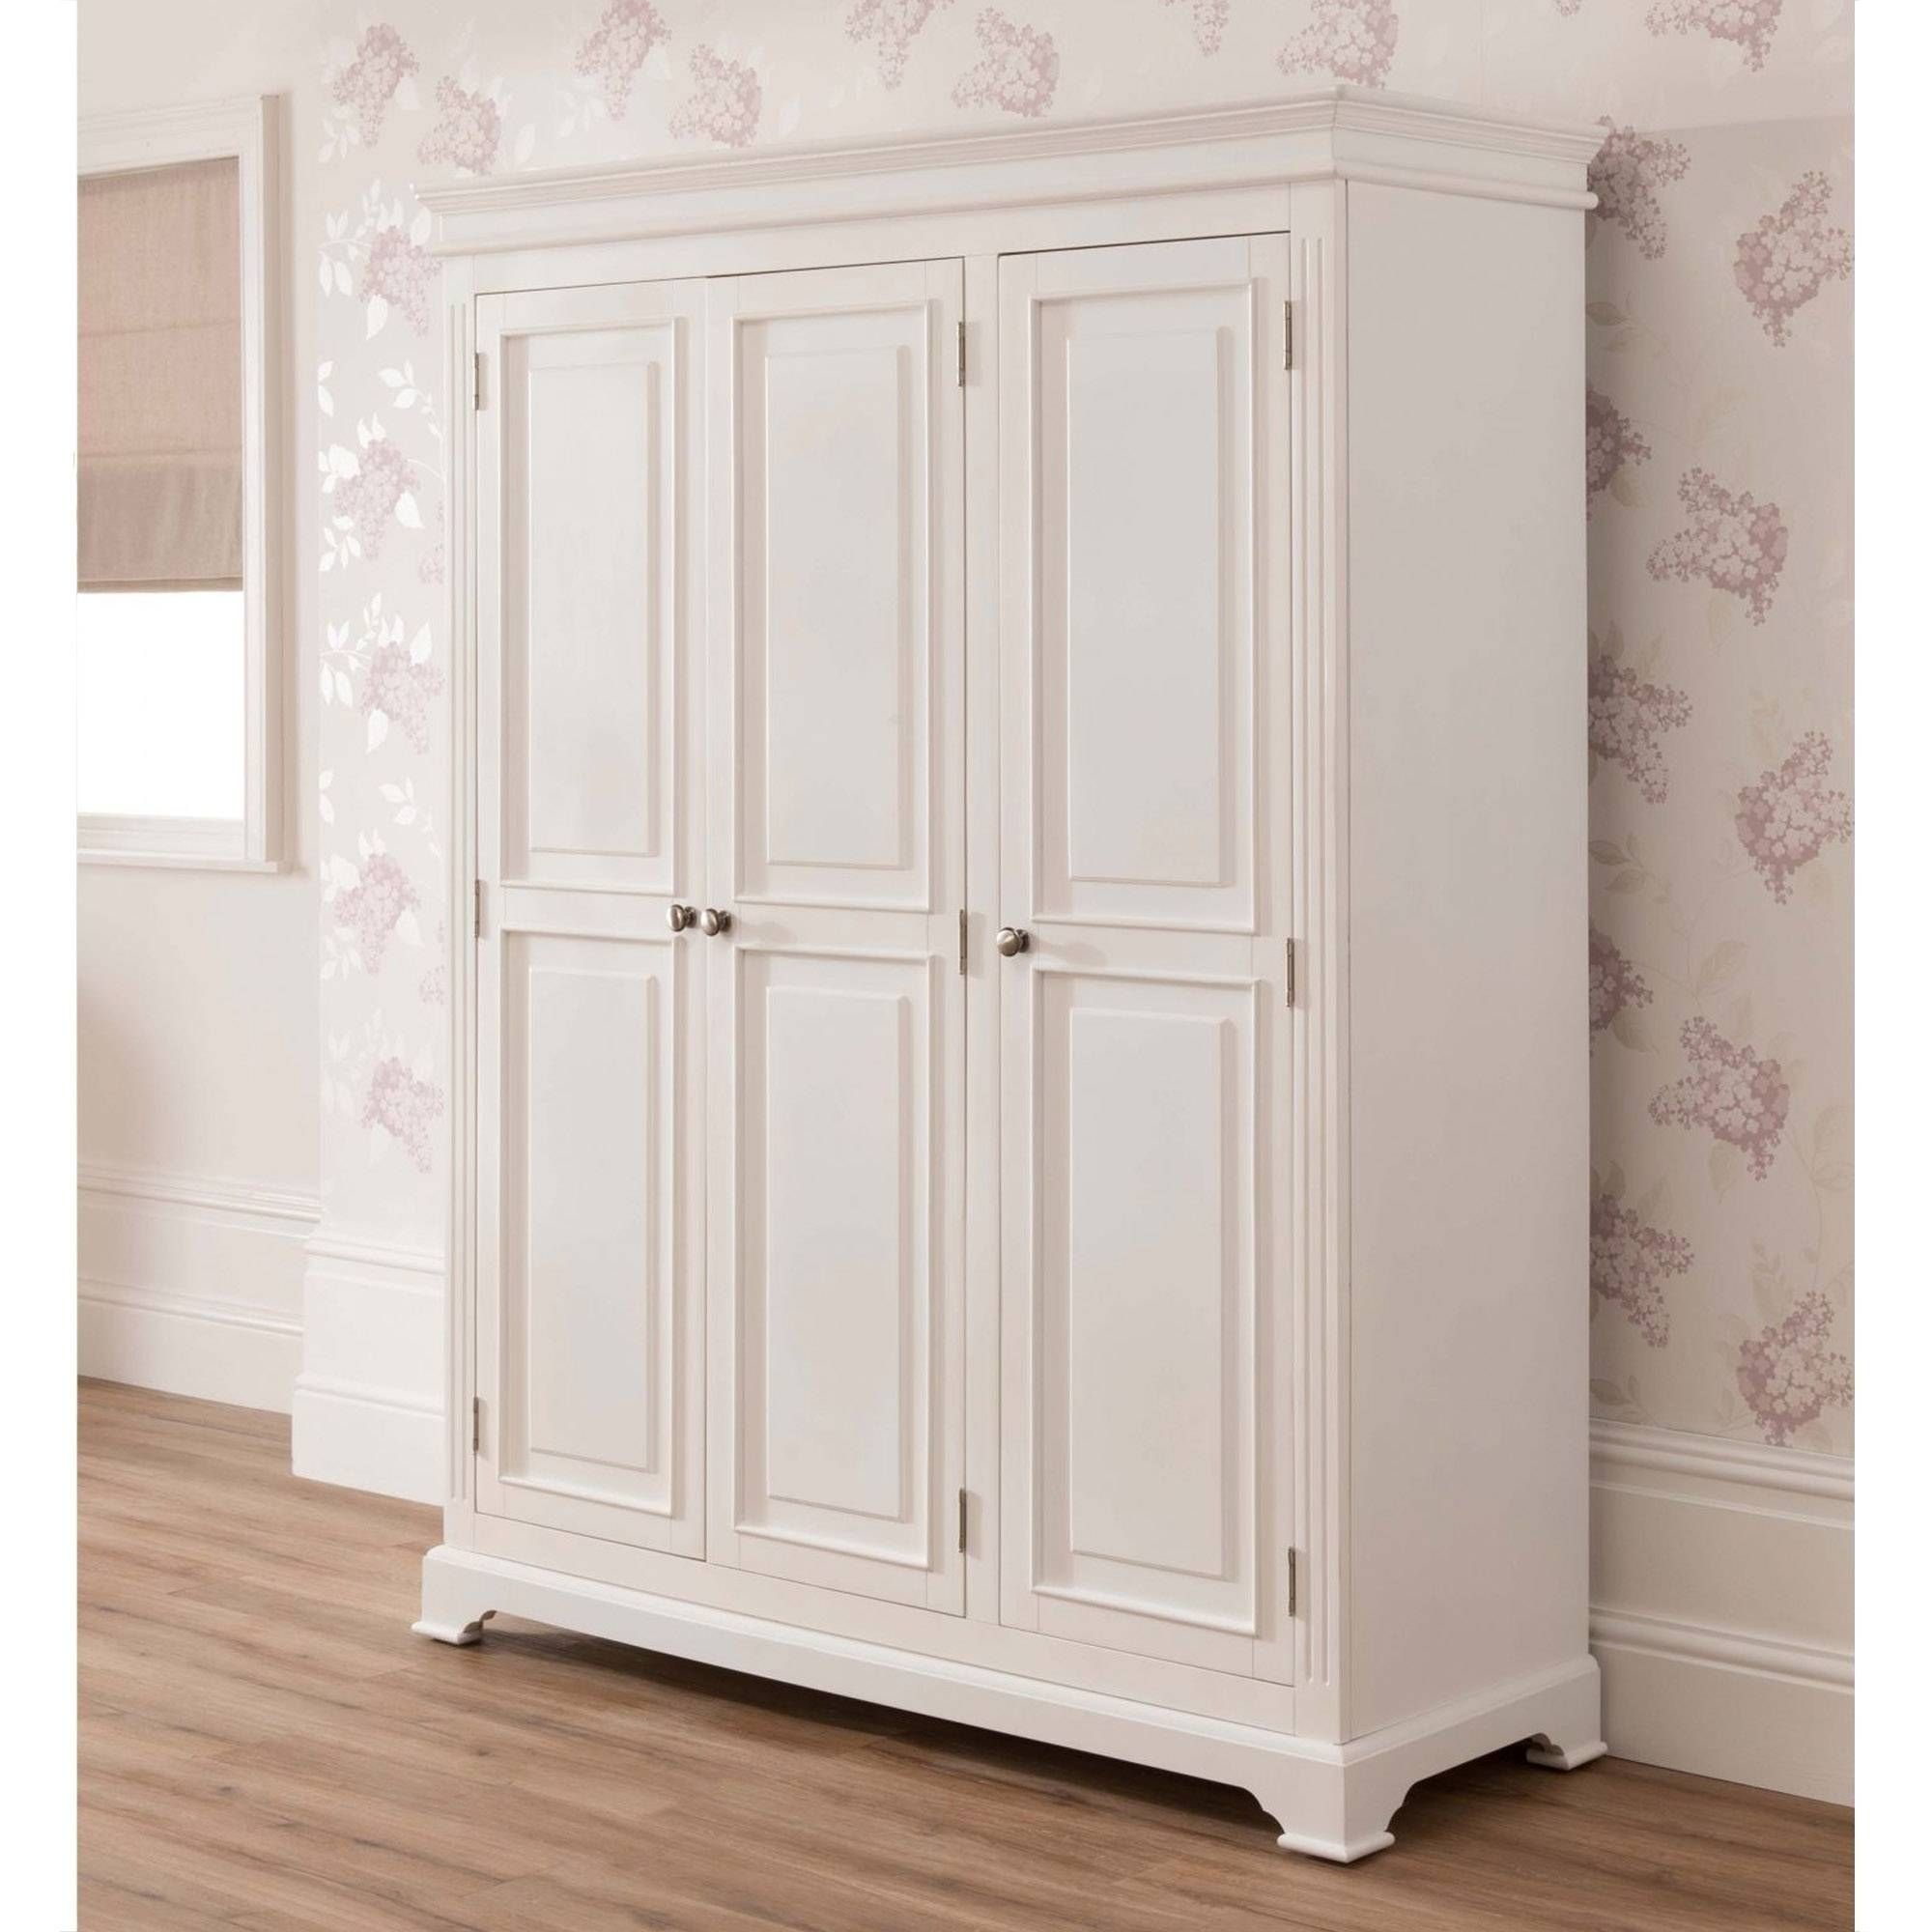 Sophia Shabby Chic Wardrobe Is A Fantastic Addition To Our Antique Pertaining To French Shabby Chic Wardrobes (Photo 5 of 15)